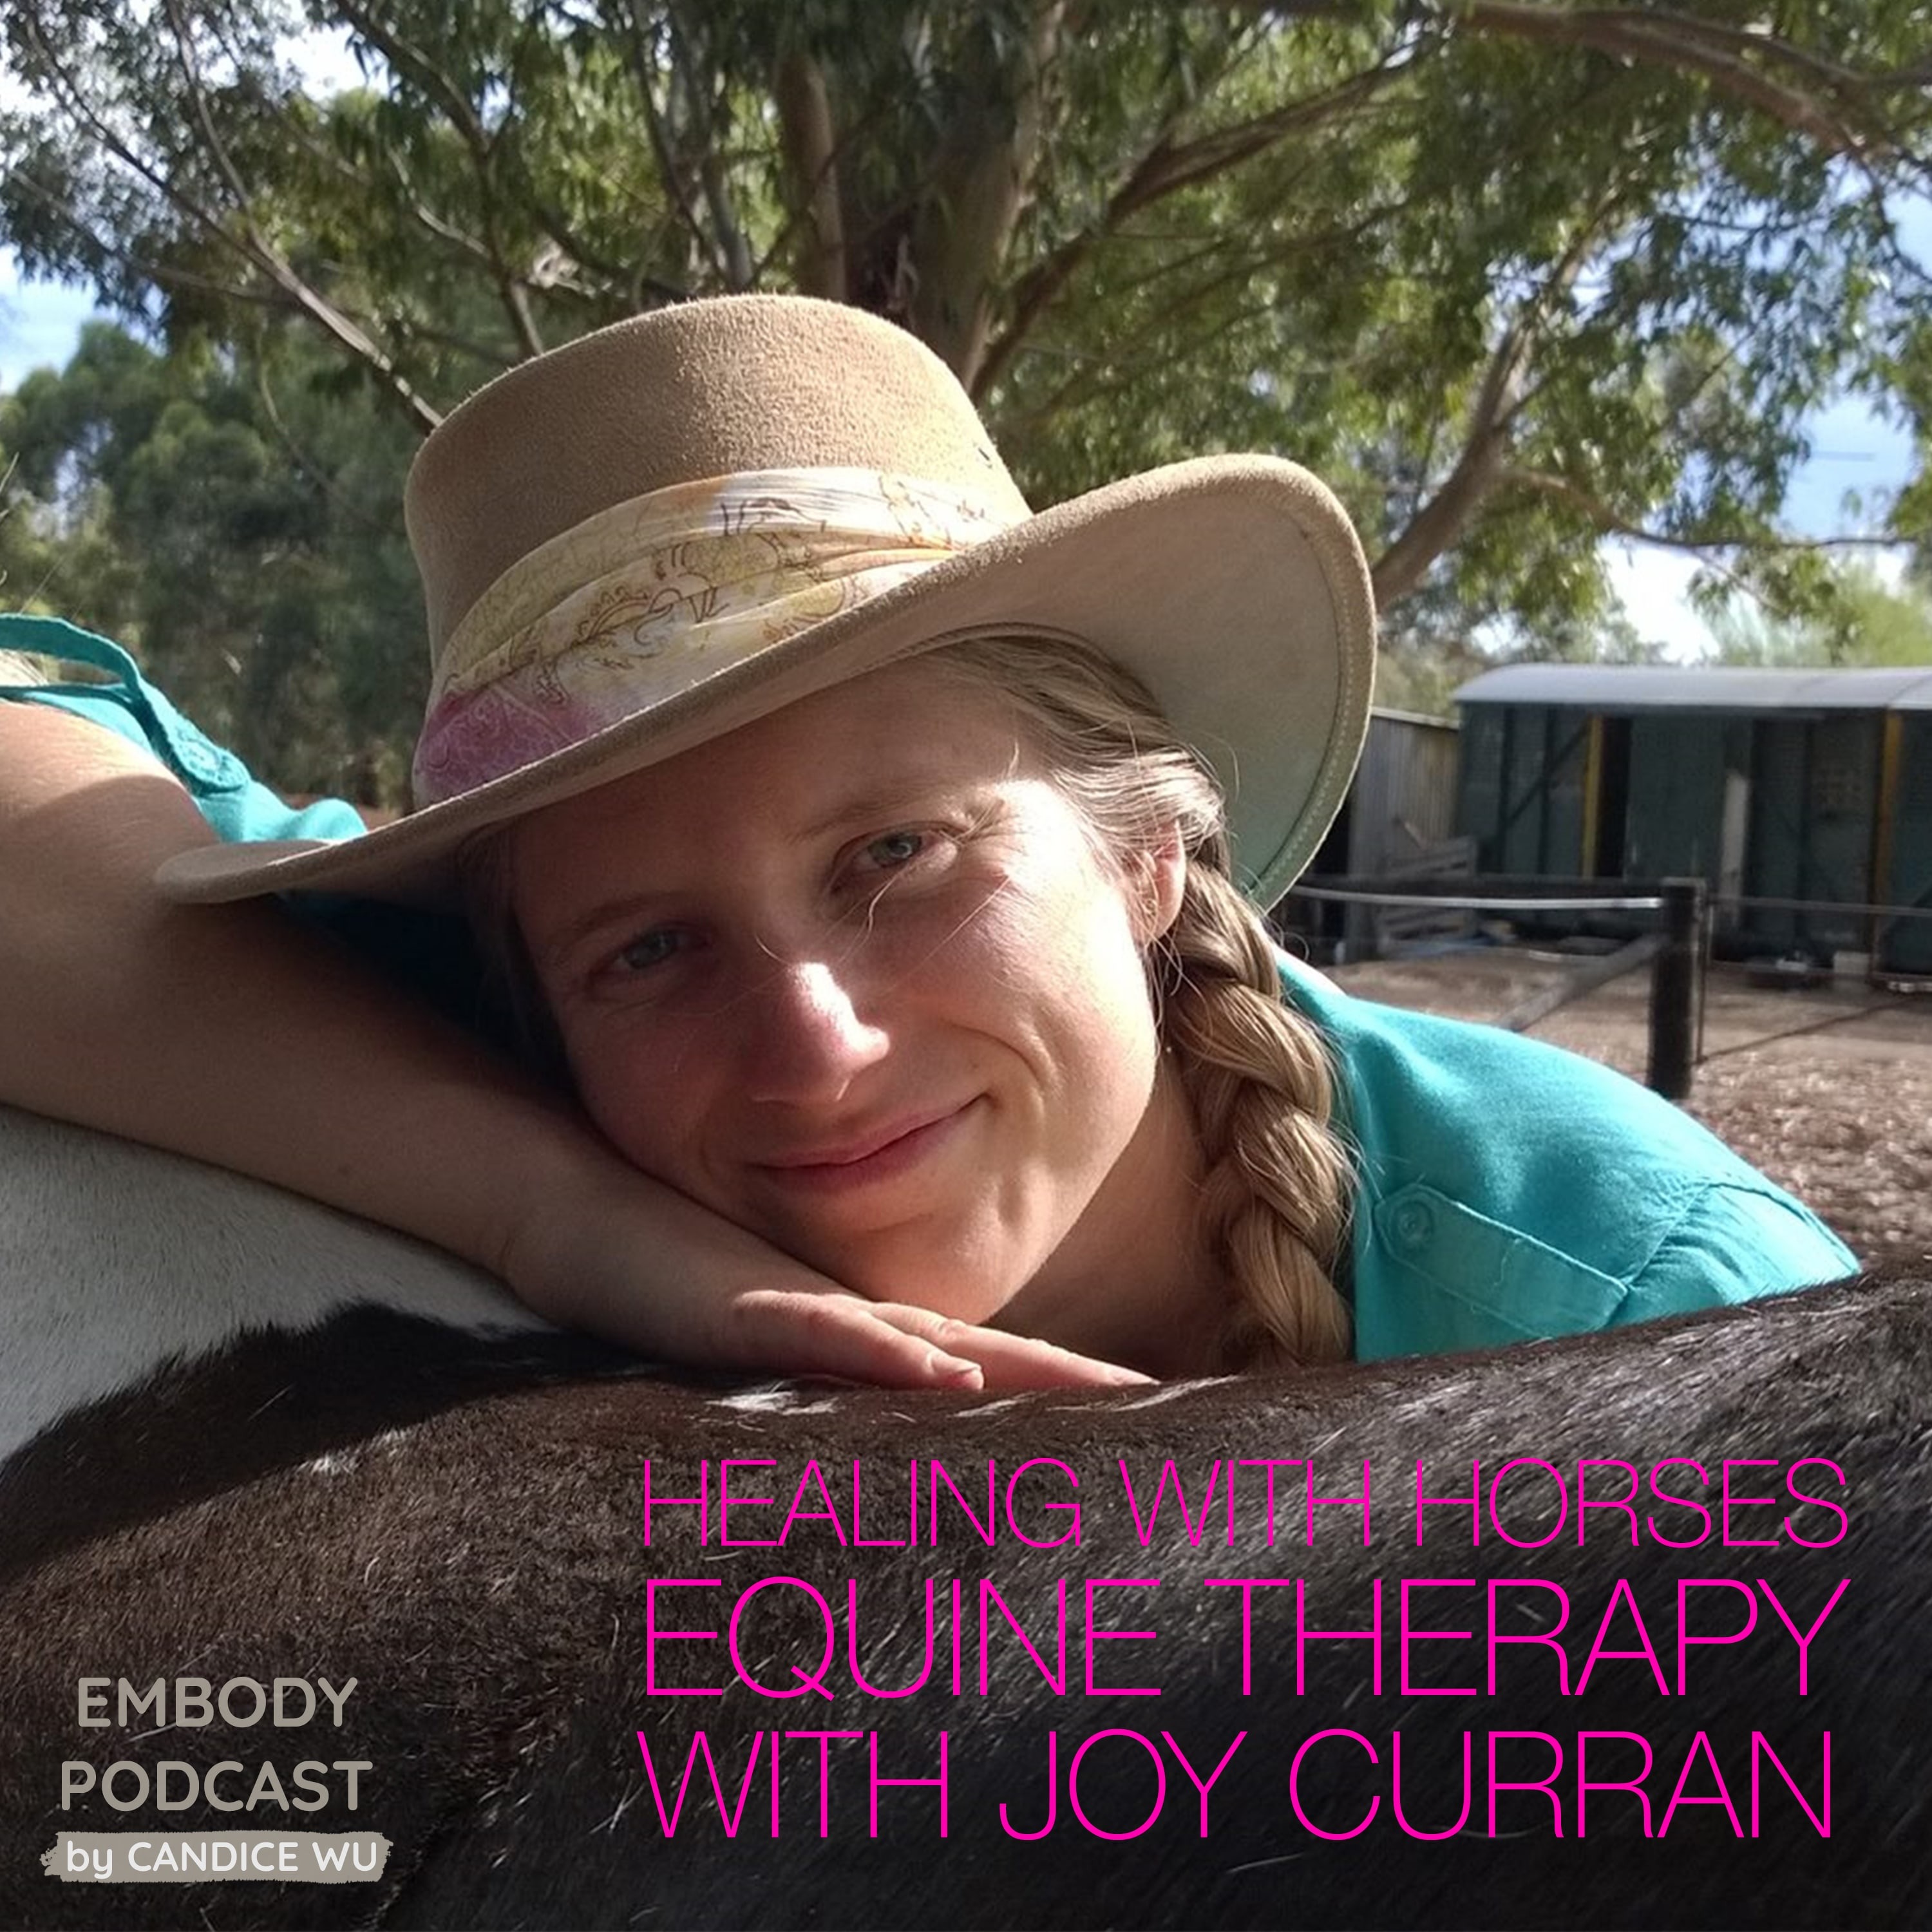 33: Healing with Horses A Conversation about Equine Therapy with Joy Curran